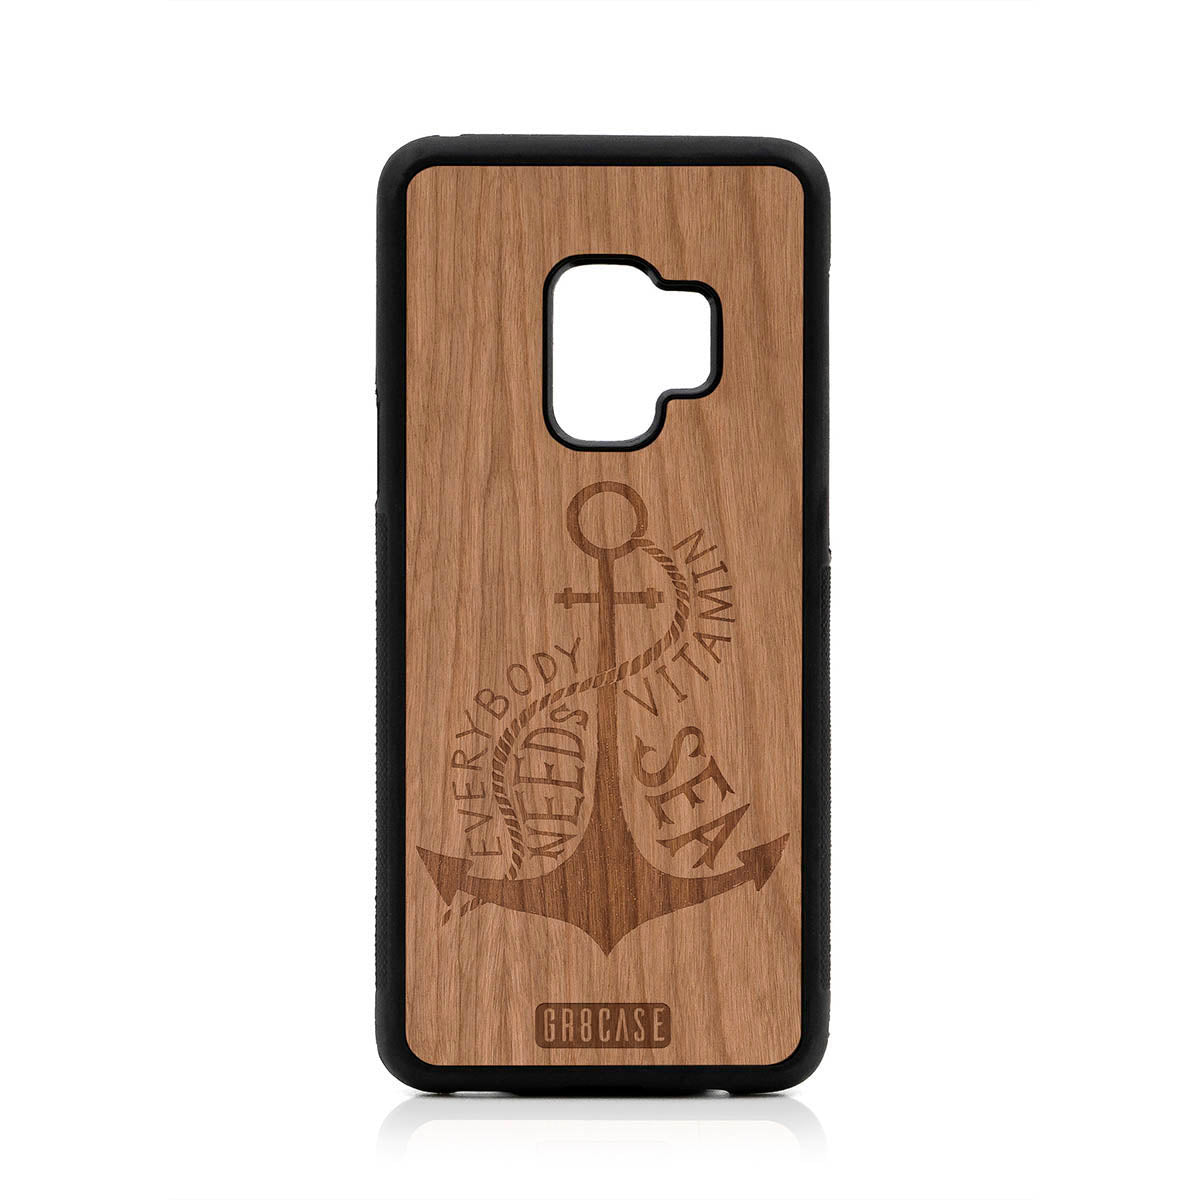 Everybody Needs Vitamin Sea (Anchor) Design Wood Case For Samsung Galaxy S9 by GR8CASE